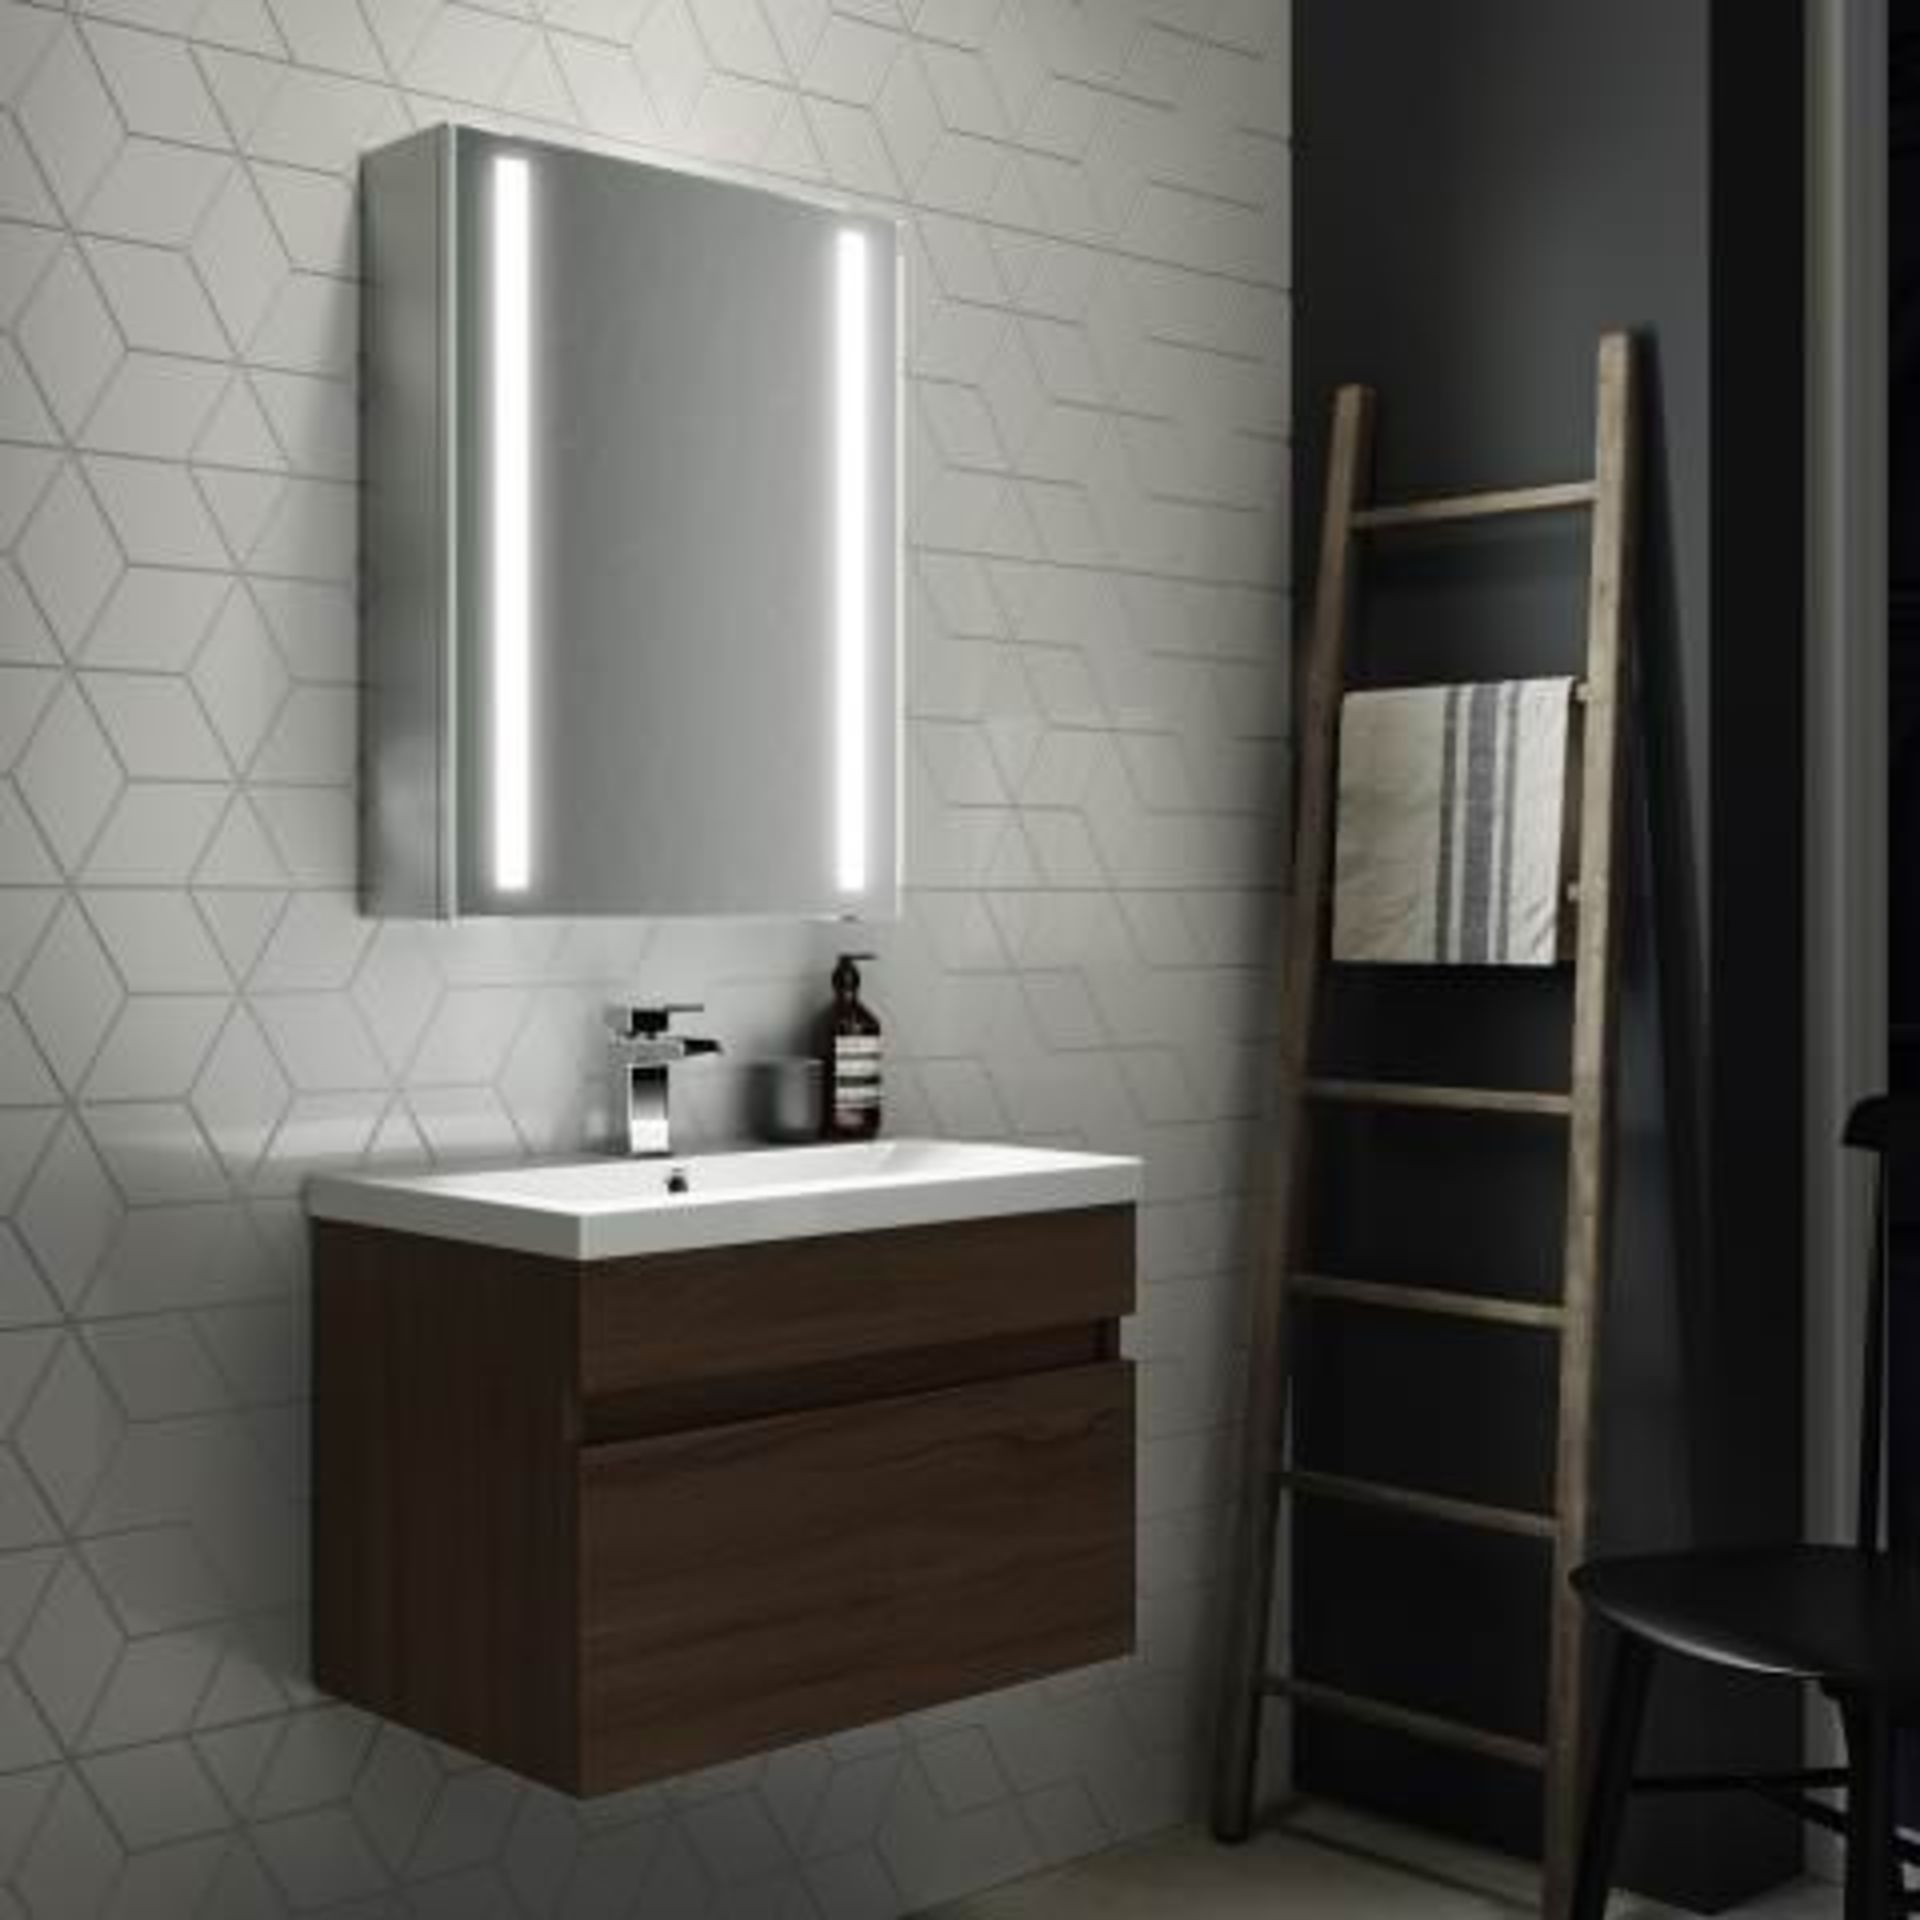 (J1) 500x650mm Dawn Illuminated LED Mirror Cabinet. RRP £599.99. Perfect Reflection The featured - Image 3 of 5